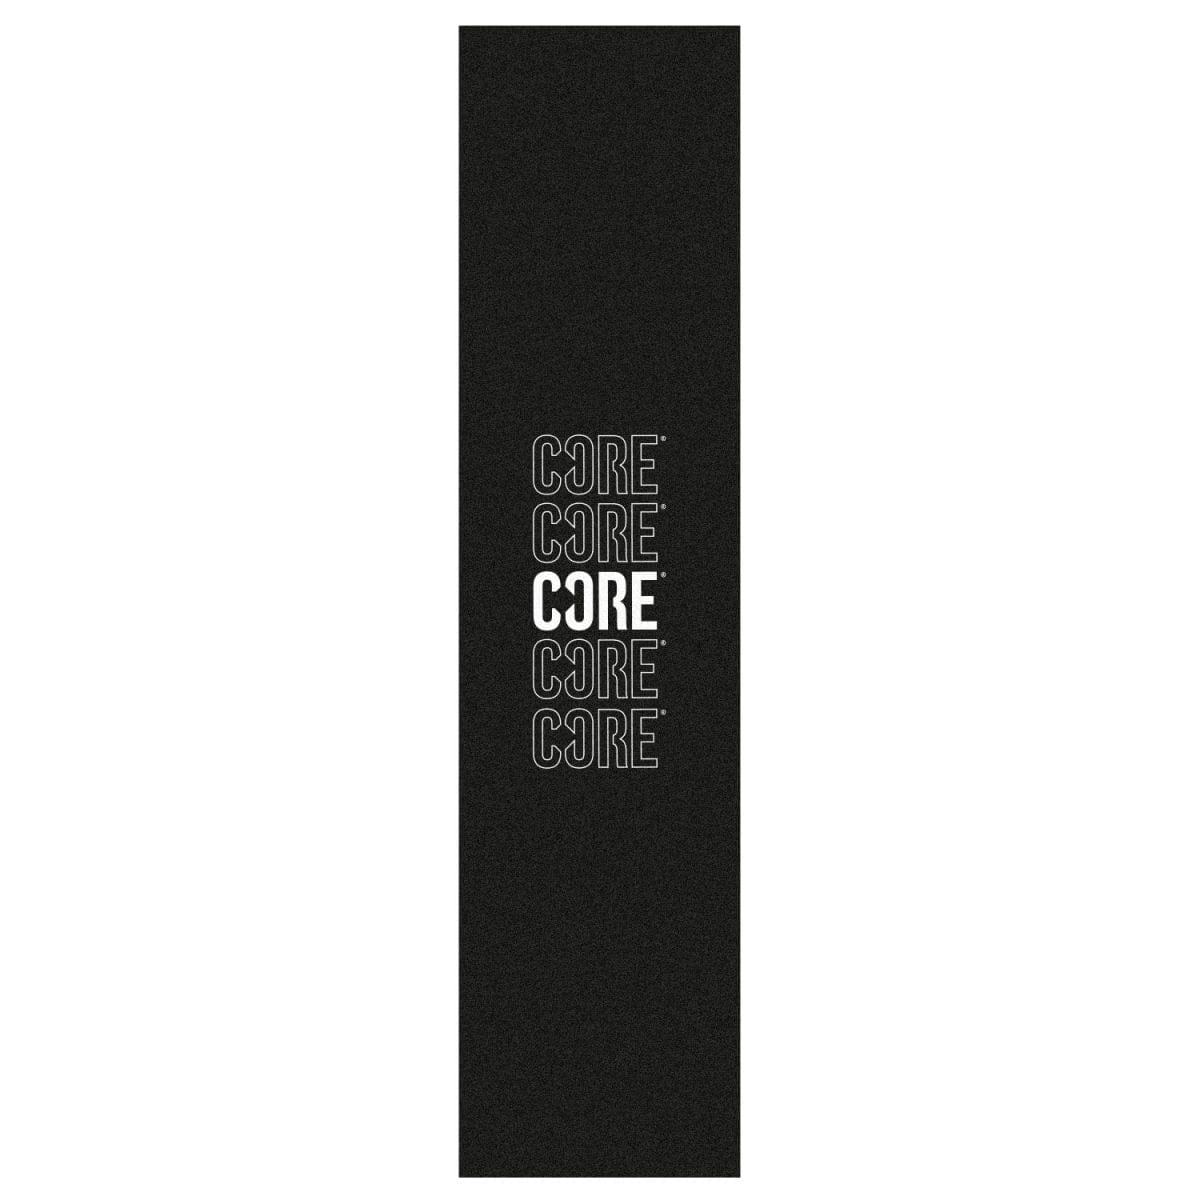 CORE Scooter Grip Tape Echo Black I Grip Tape Scooter